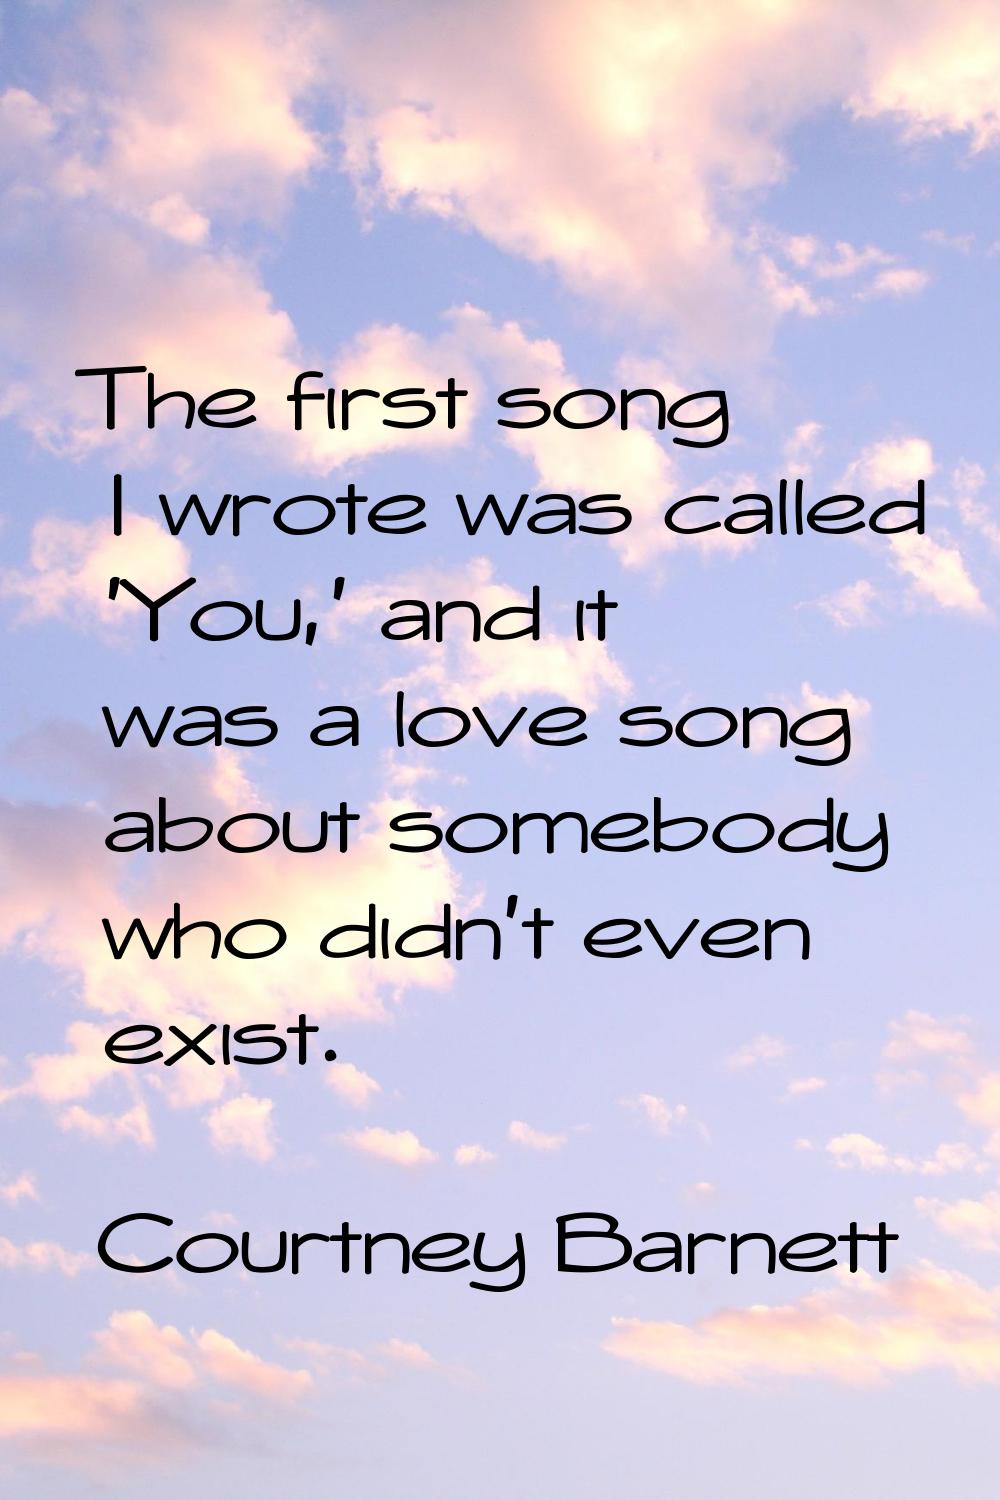 The first song I wrote was called 'You,' and it was a love song about somebody who didn't even exis